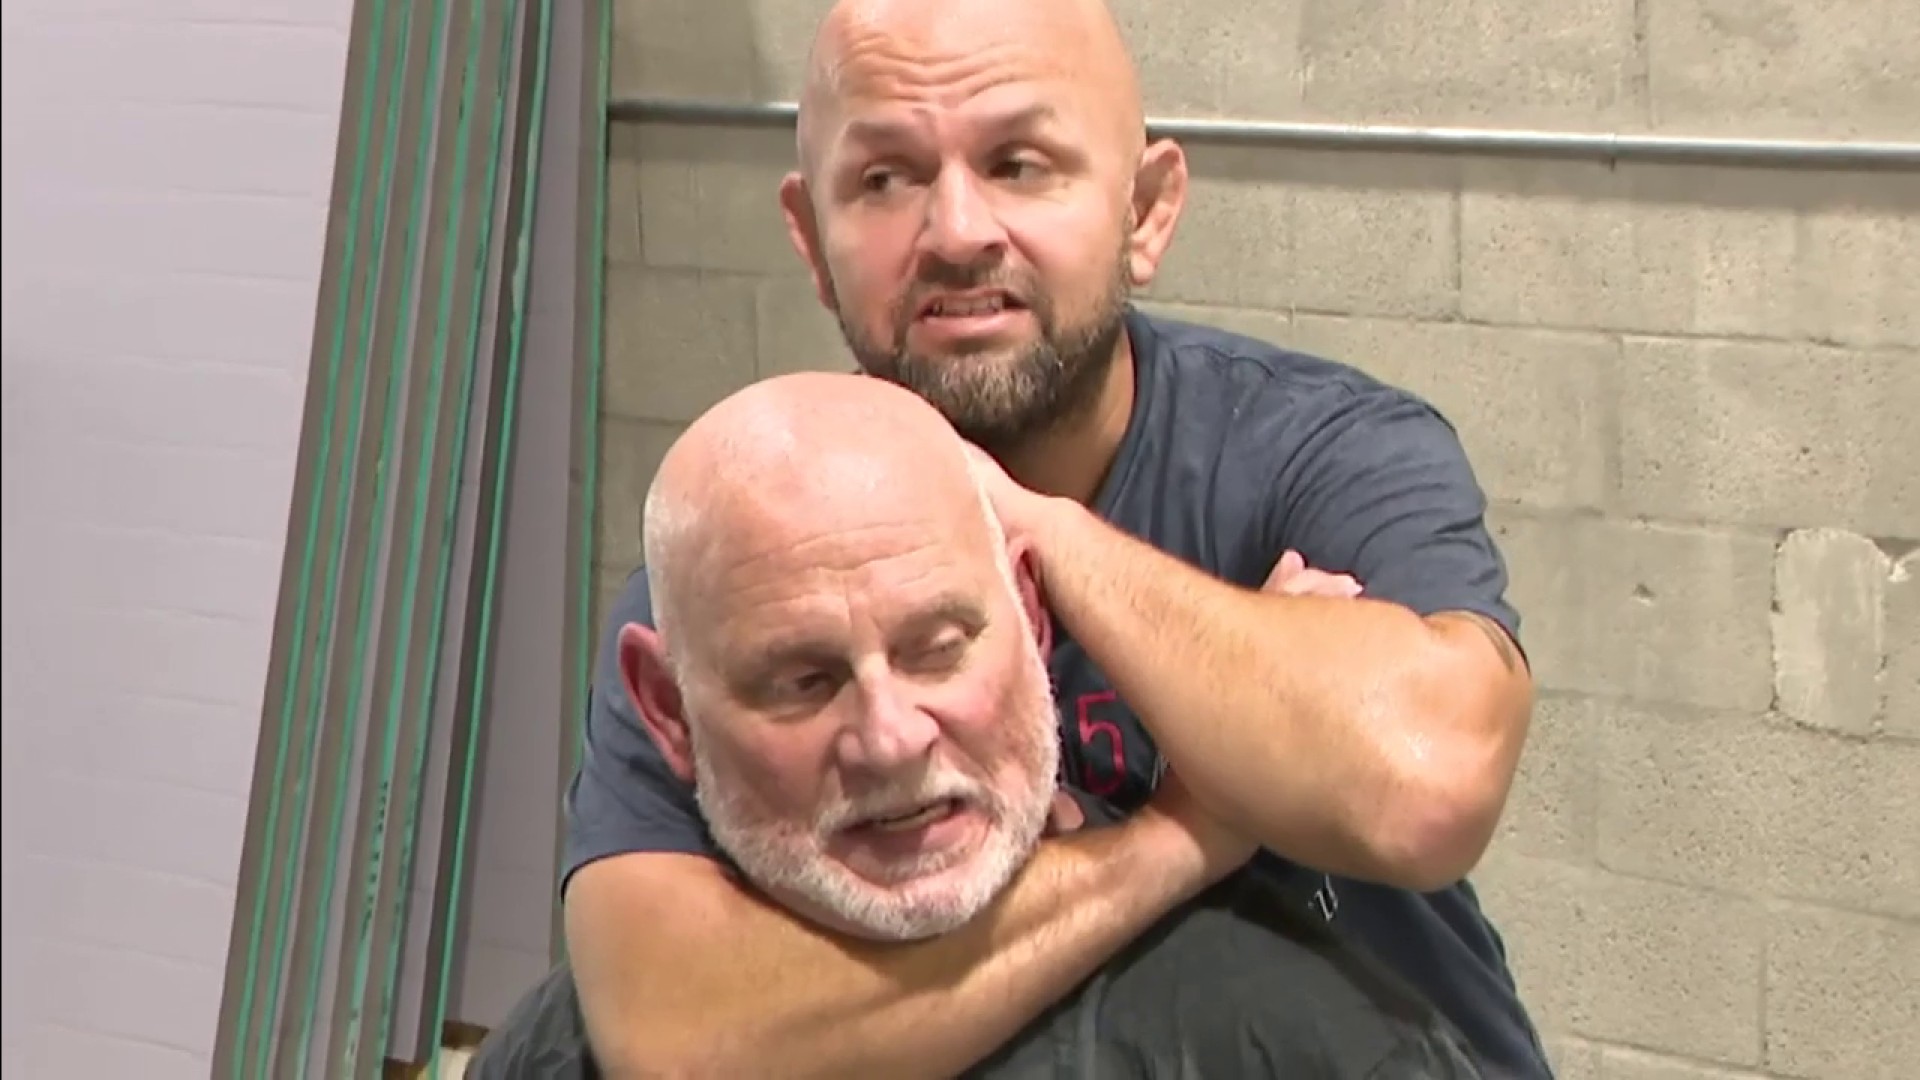 Chokeholds and Lateral Vascular Restraints Call For Training